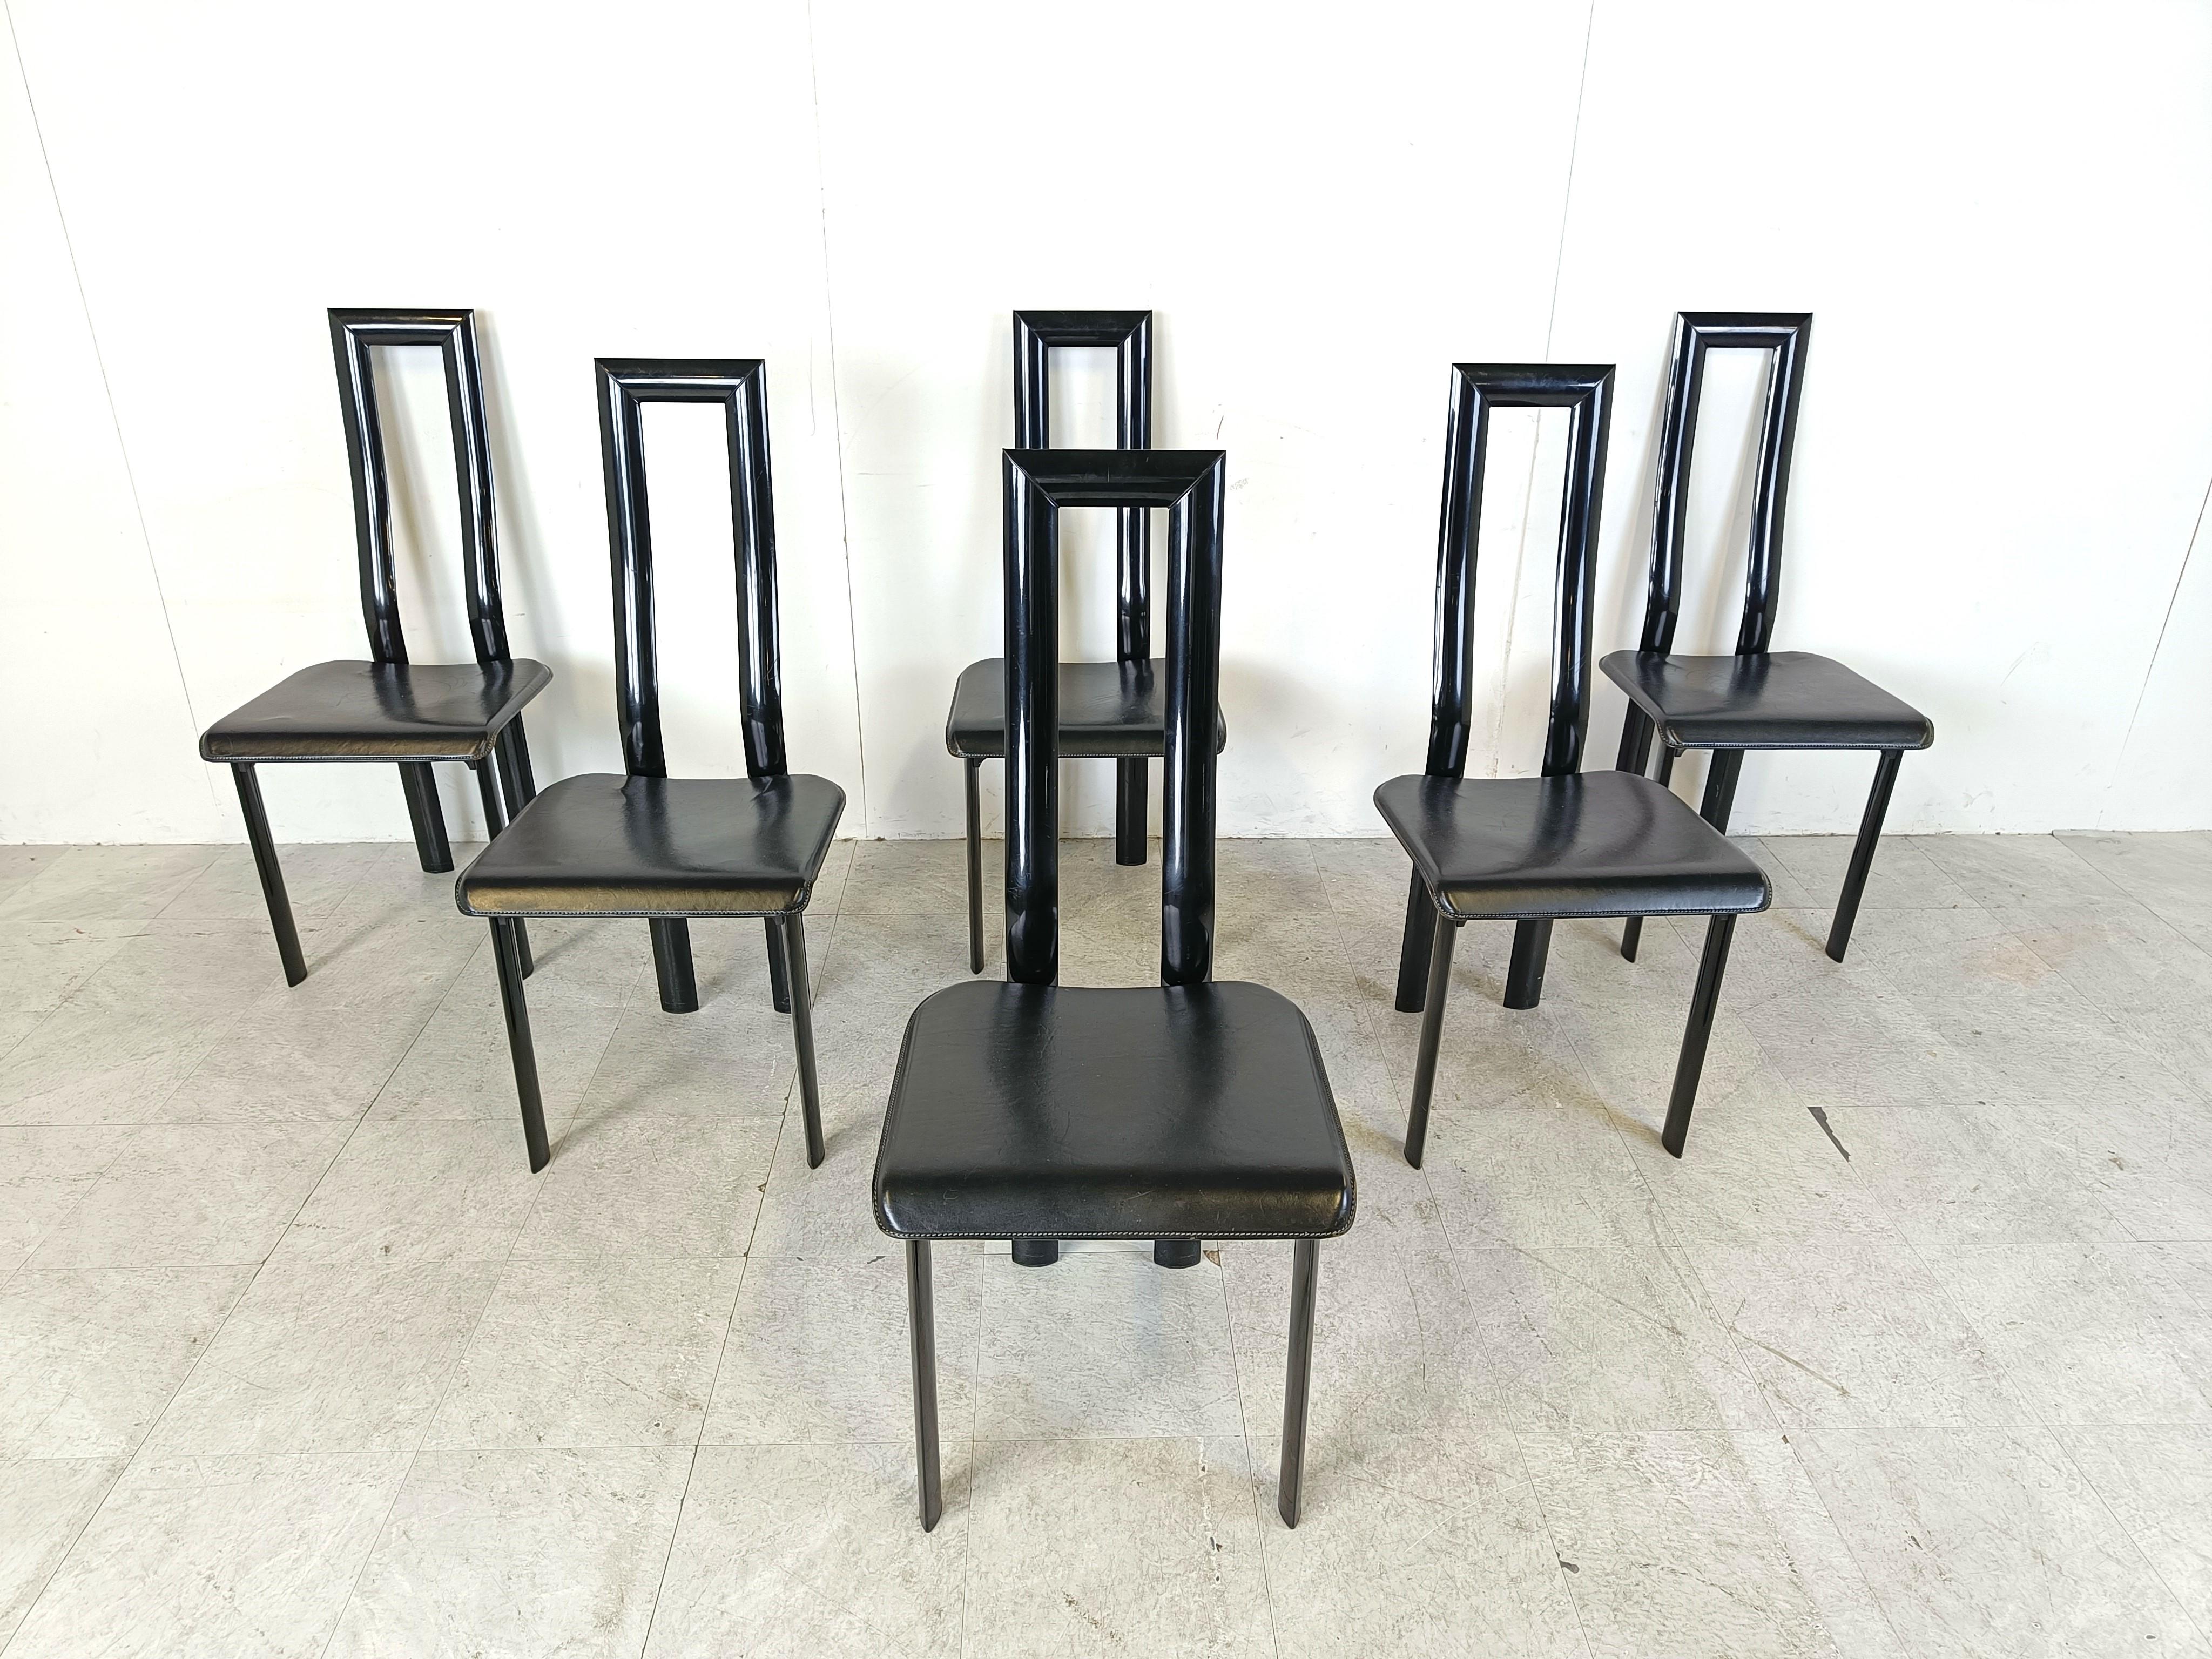 Italian Model Regia Dining Chairs by Antonello Mosca for Ycami.

Both frame and seats are completely in leather. 

Timeless post modern design.

Very good overall condition

1980s - Italy

Dimensions:
Height: 102cm/40.15